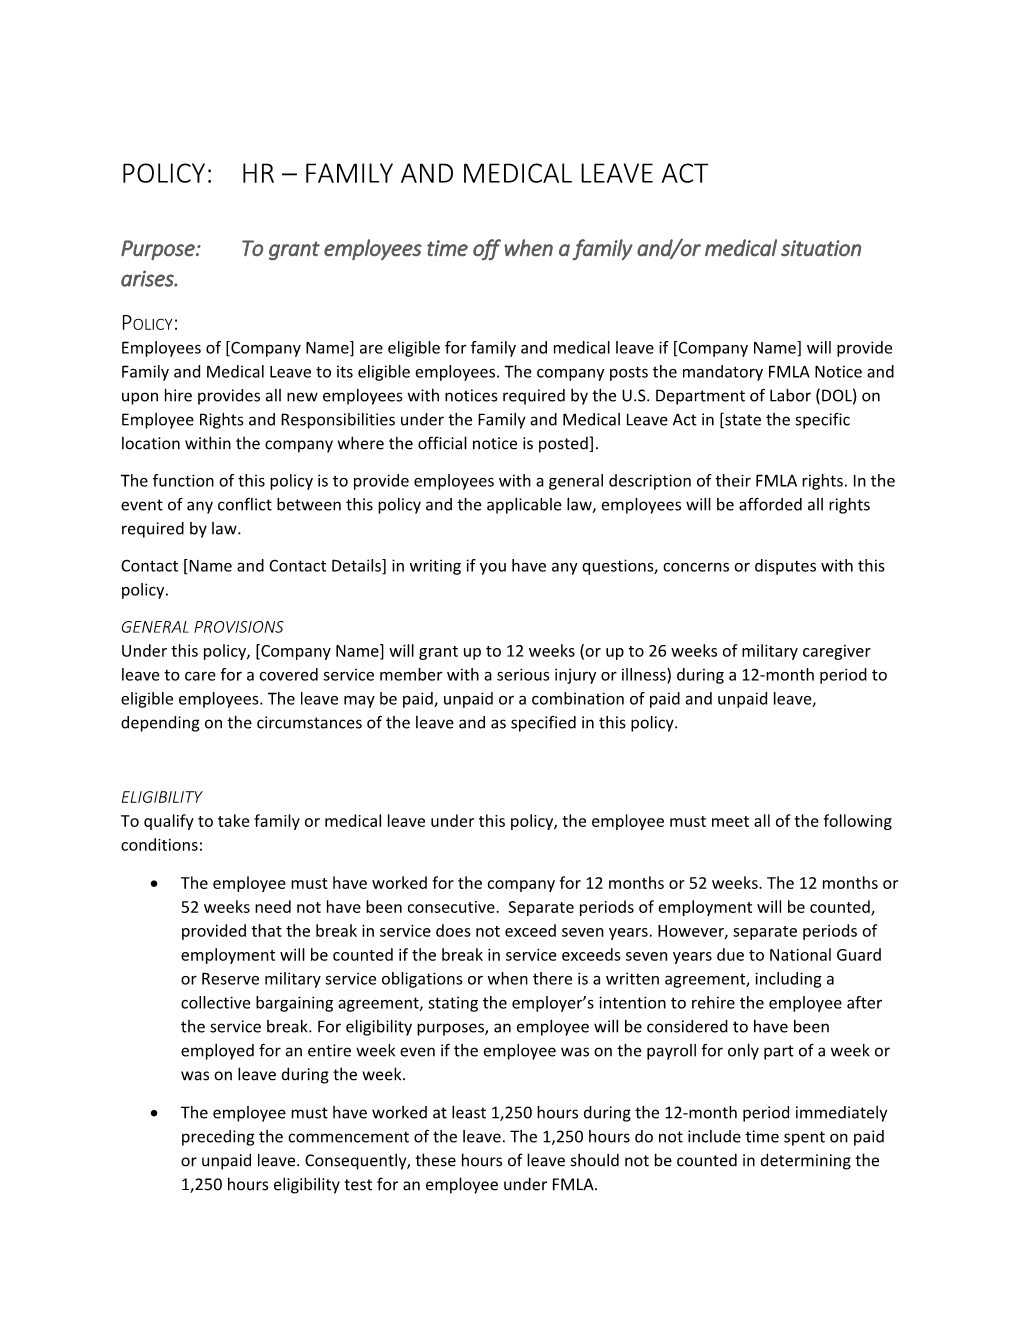 Policy:HR Family and Medical Leave Act